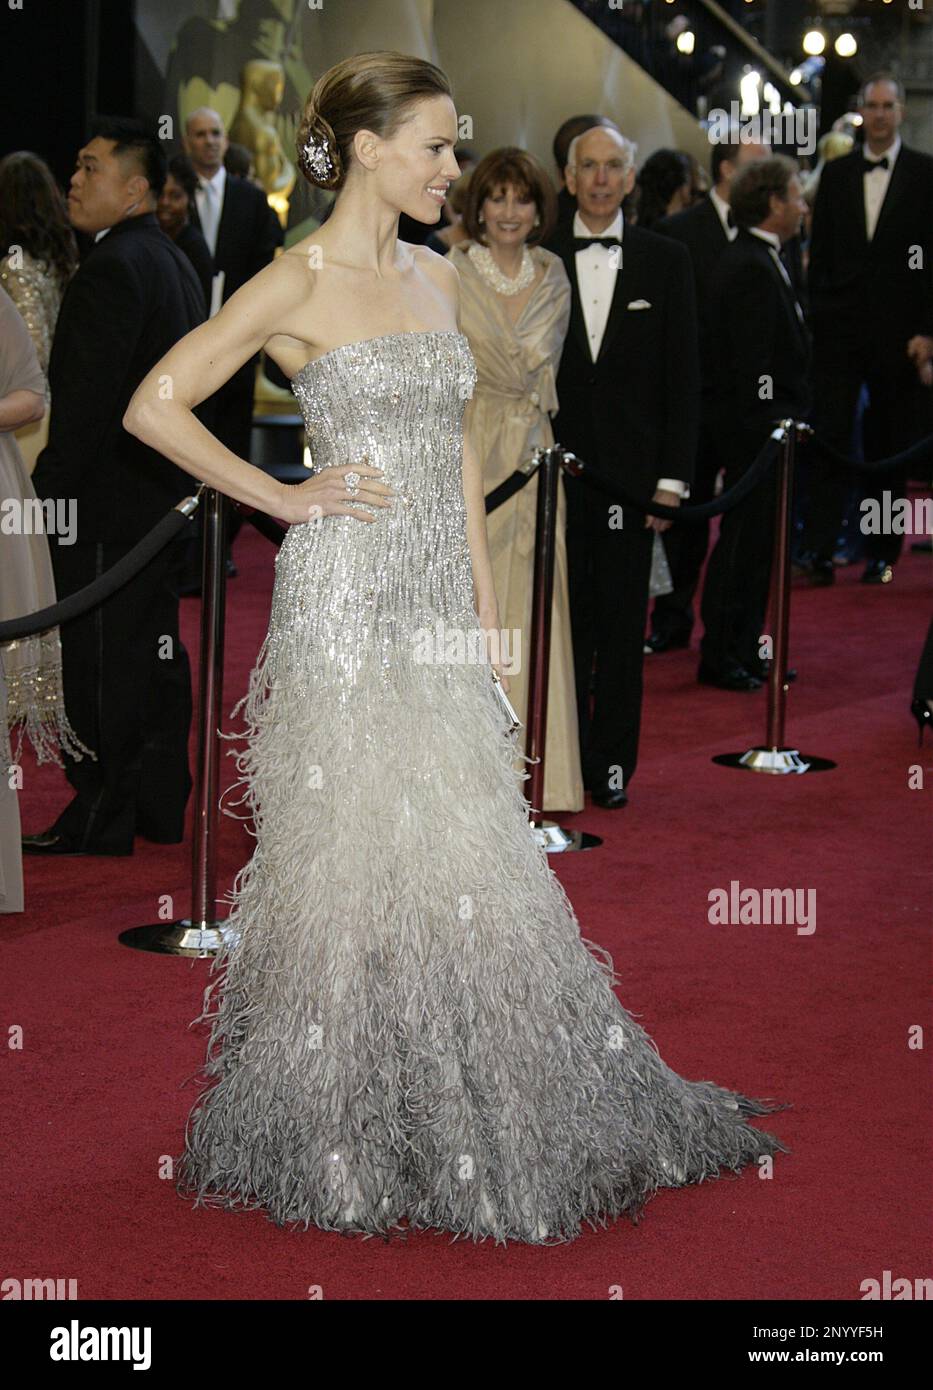 Actress Hilary Swank arrives at the 83rd Annual Academy Awards held at the Kodak Theatre on February 27, 2011 in Los Angeles, California. Photo by Francis Specker Stock Photo